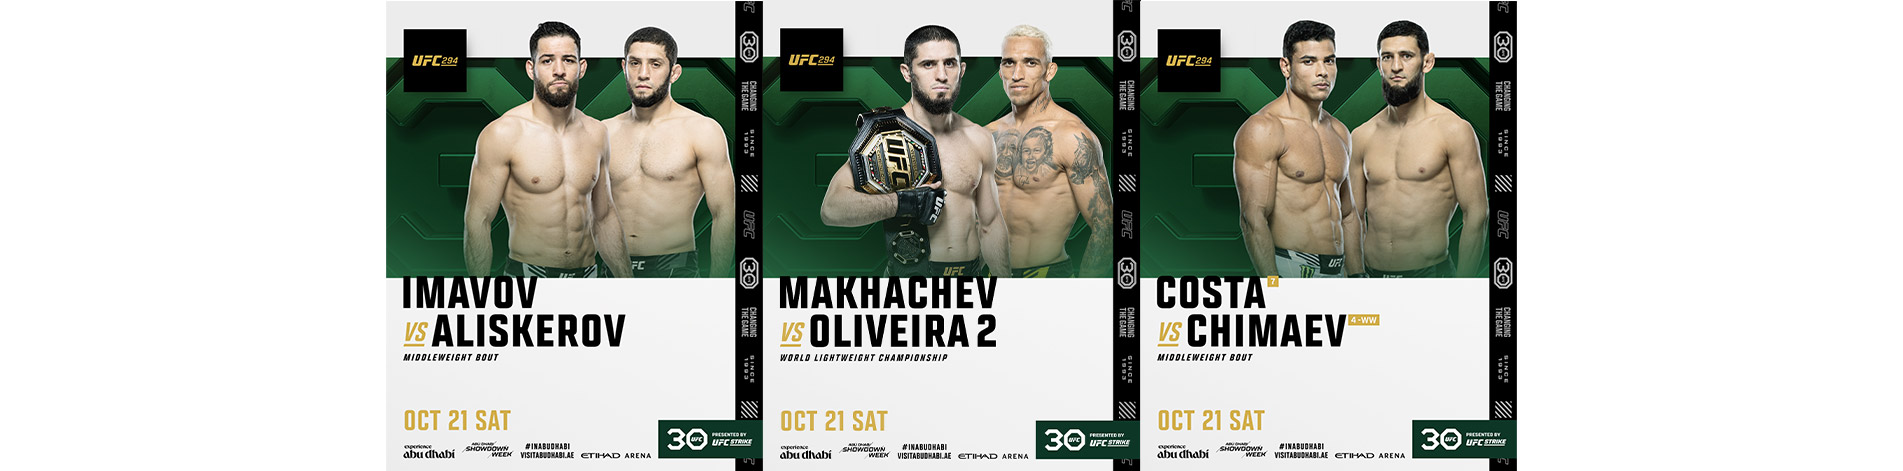 Abu Dhabi UFC 294 Packages 2023